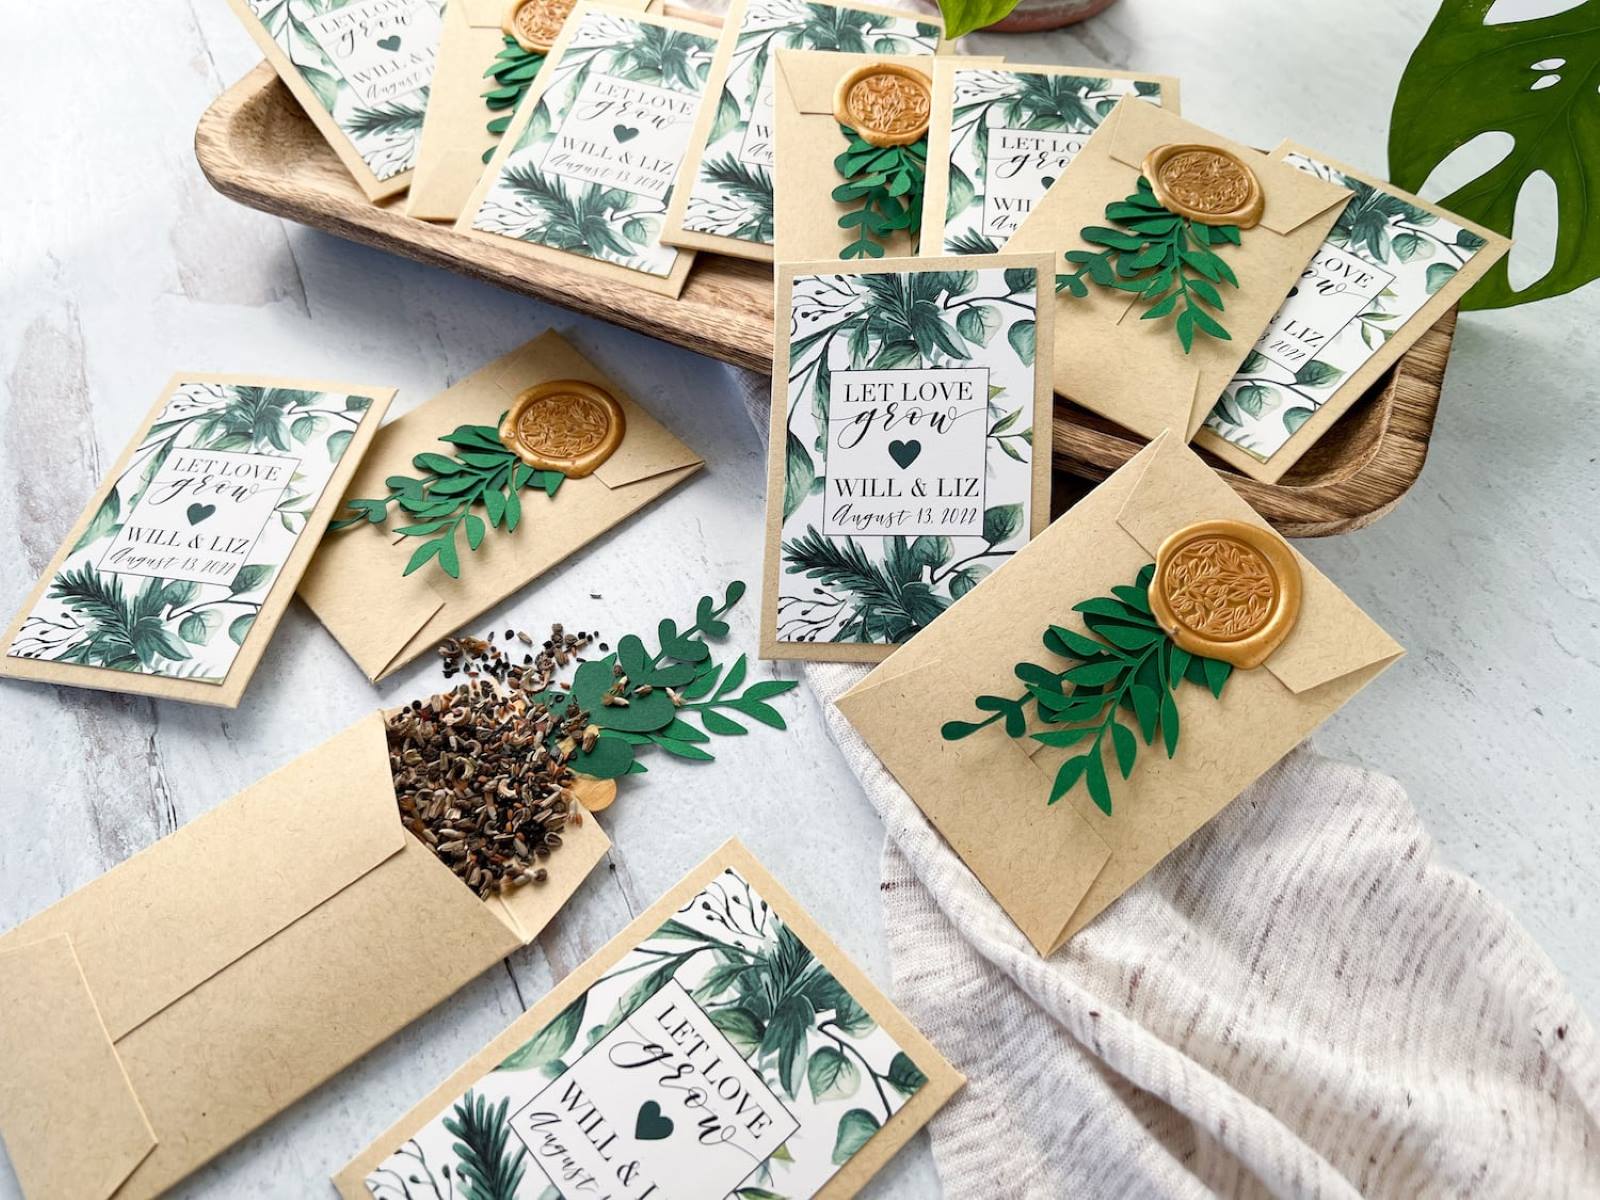 How Much Seeds Should You Put In Seed Packet For Wedding Favor